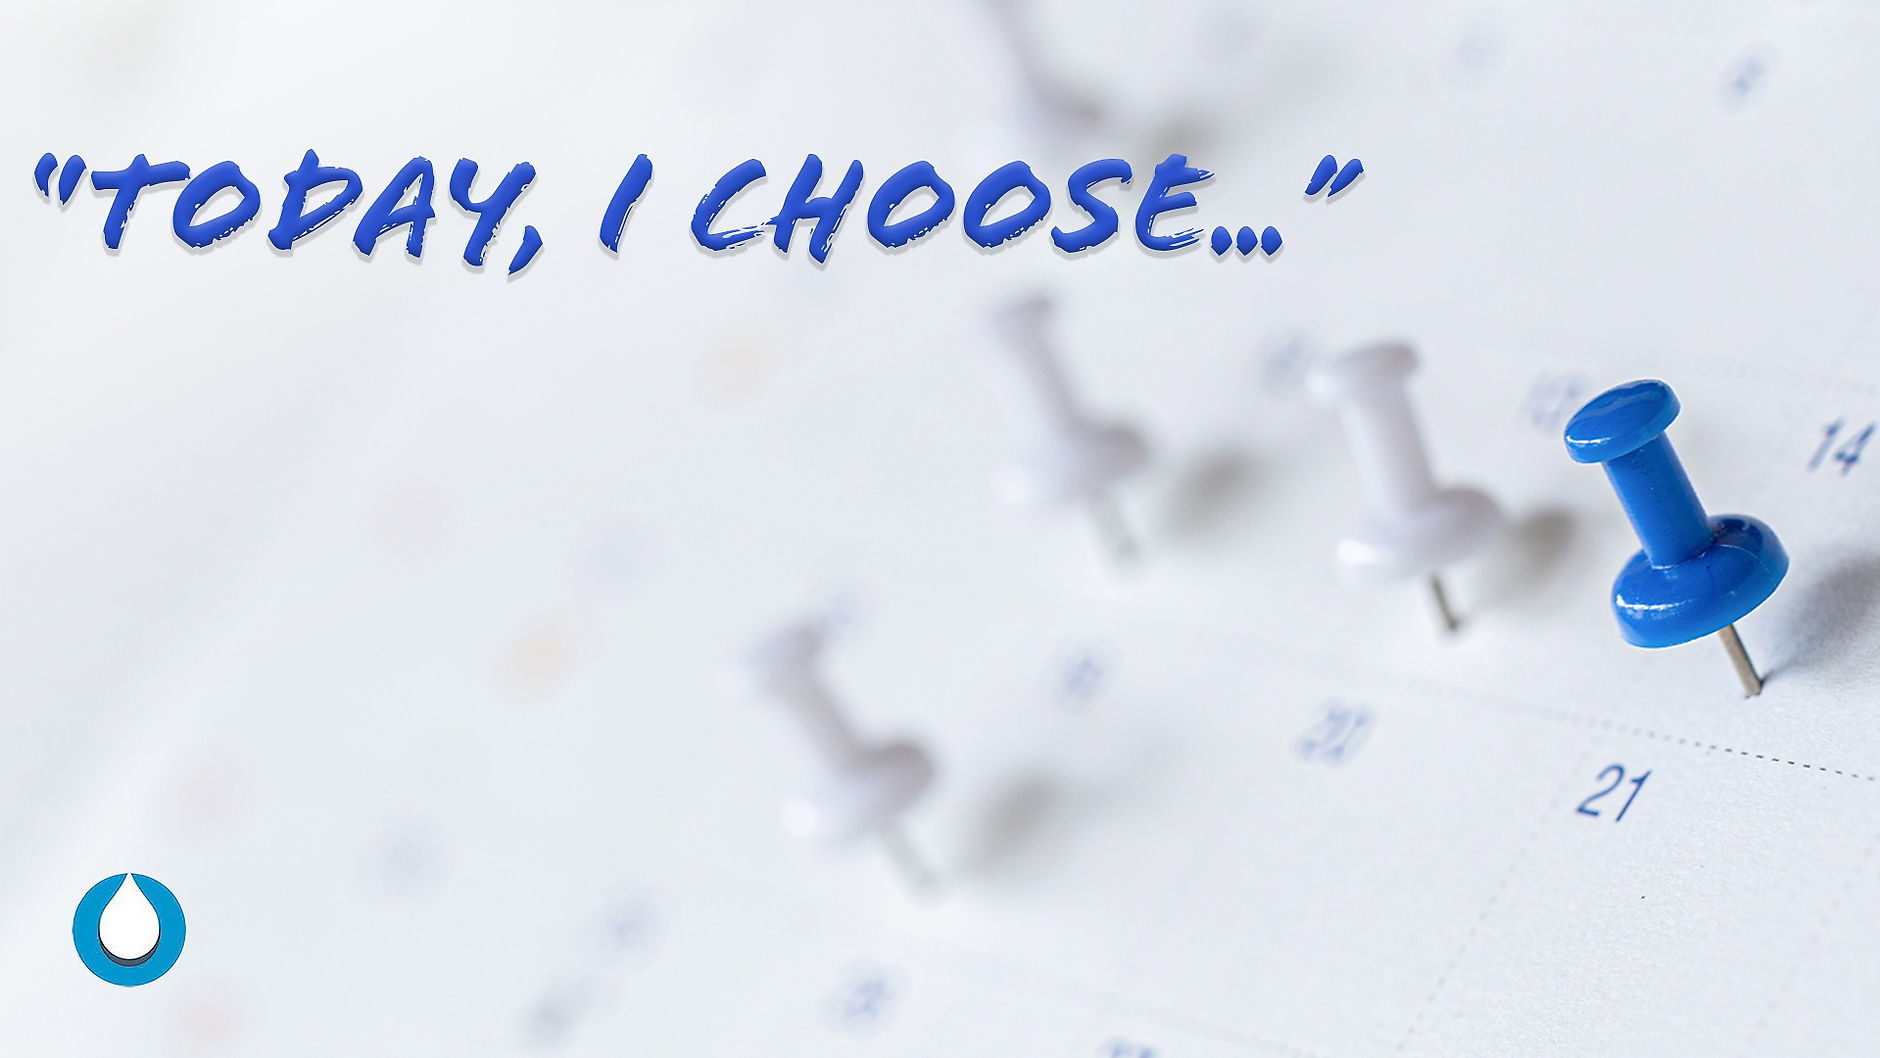 "Today I Choose..."